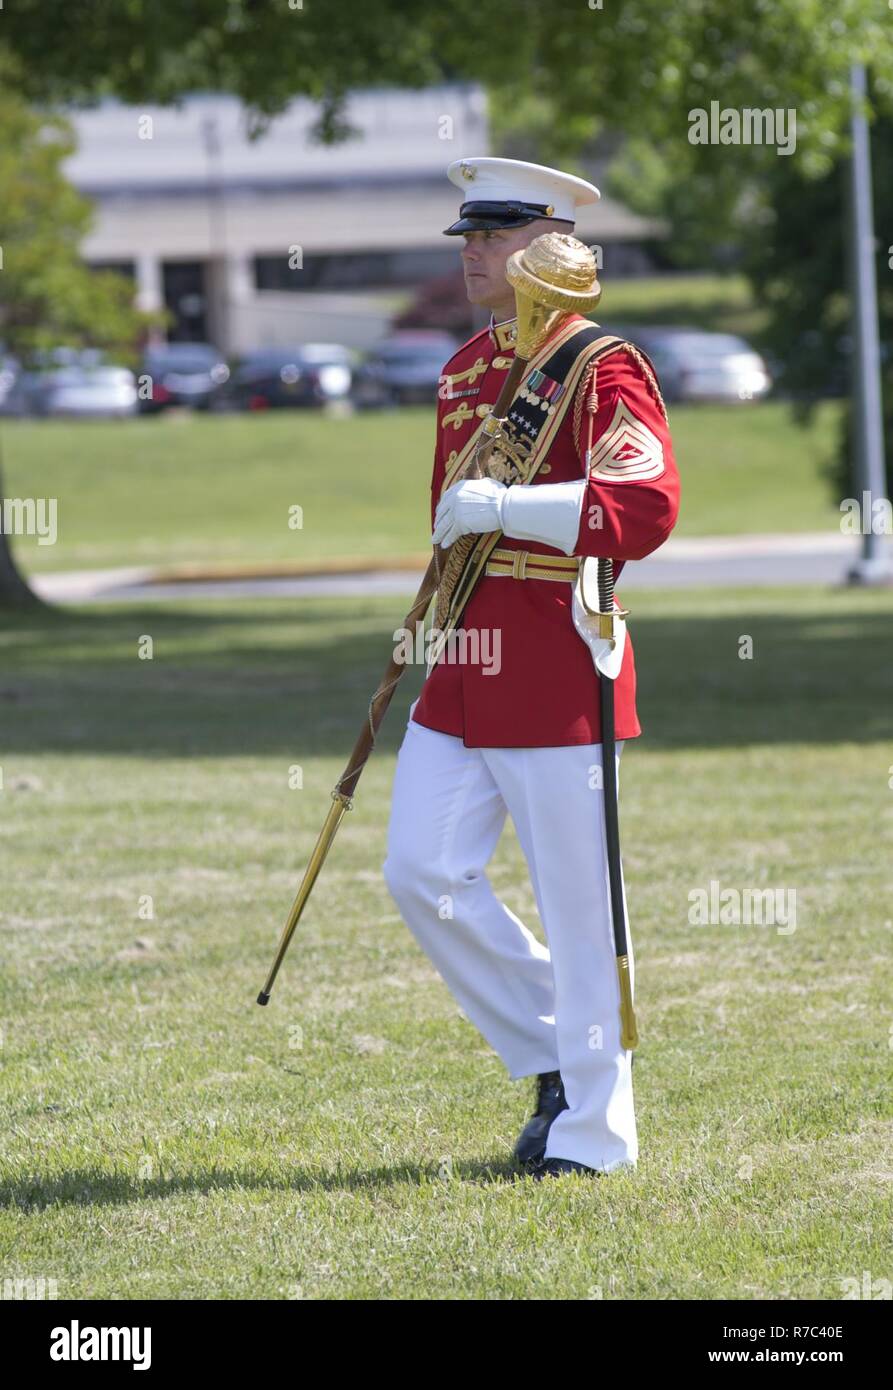 U.S. Marine Corps Master Sgt. Keith G. Martinez, drum major for the U.S. Marine Drum and Bugle Corps, marches during the Centennial Celebration Ceremony at Lejeune Field, Marine Corps Base Quantico (MCBQ), Va., May 10, 2017. The event commemorates the founding of MCBQ in 1917, and consisted of performances by the U.S. Marine Corps Silent Drill Platoon and the U.S. Marine Drum & Bugle Corps. Stock Photo